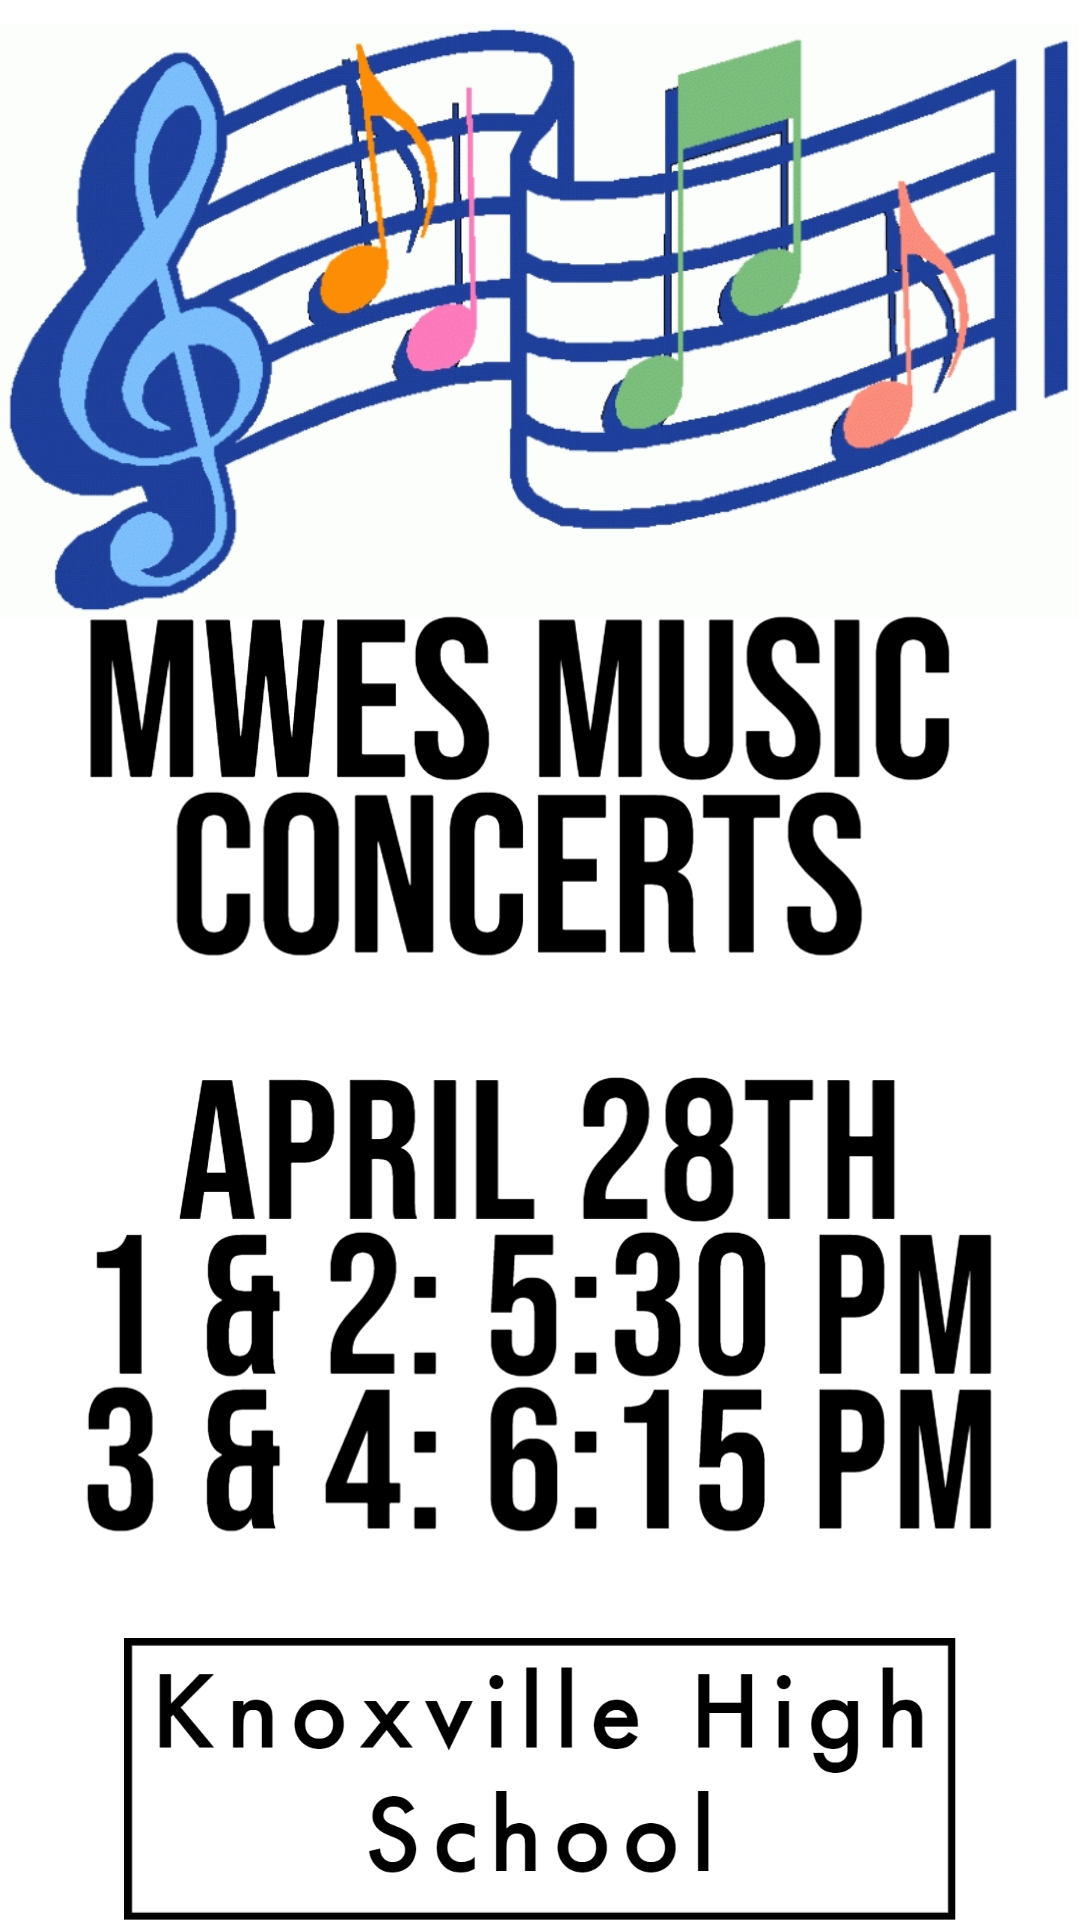 MWES Music Concerts for 1st - 4th Grade